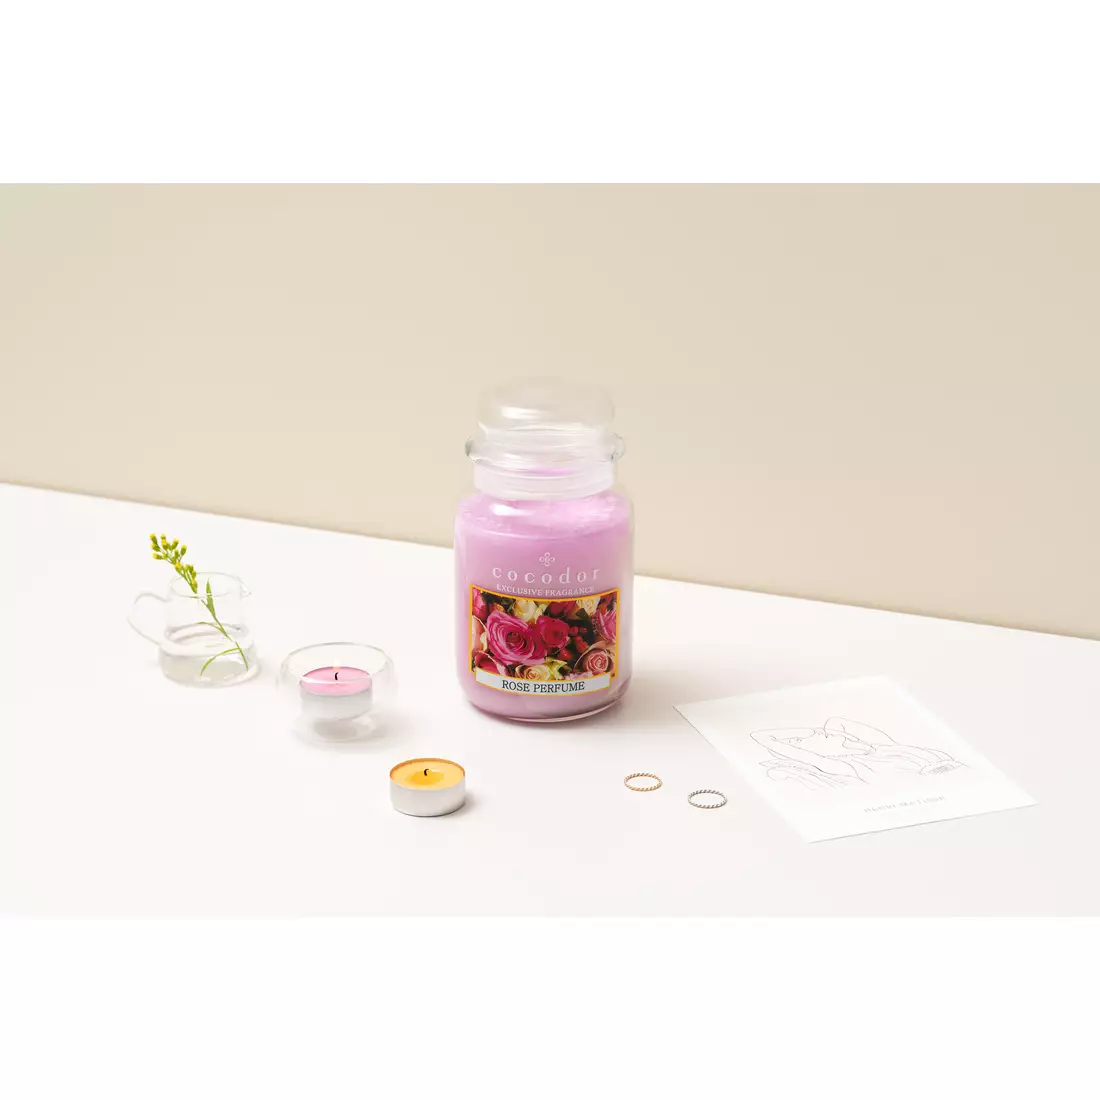 COCODOR scented candle rose perfume 550 g